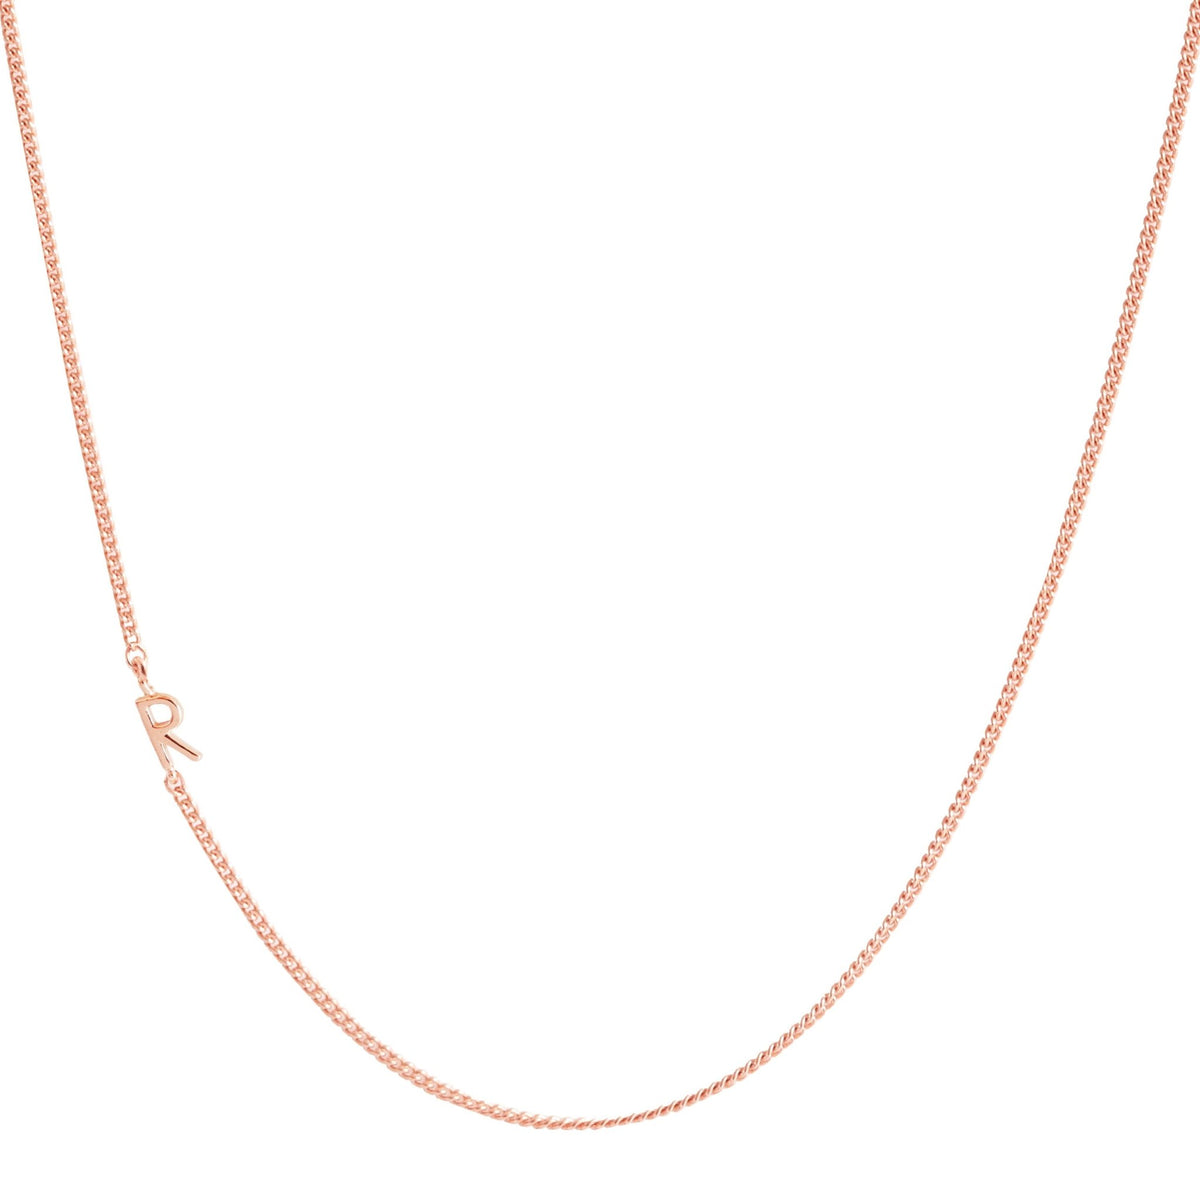 NOTABLE OFFSET INITIAL NECKLACE - R - GOLD, ROSE GOLD, OR SILVER - SO PRETTY CARA COTTER